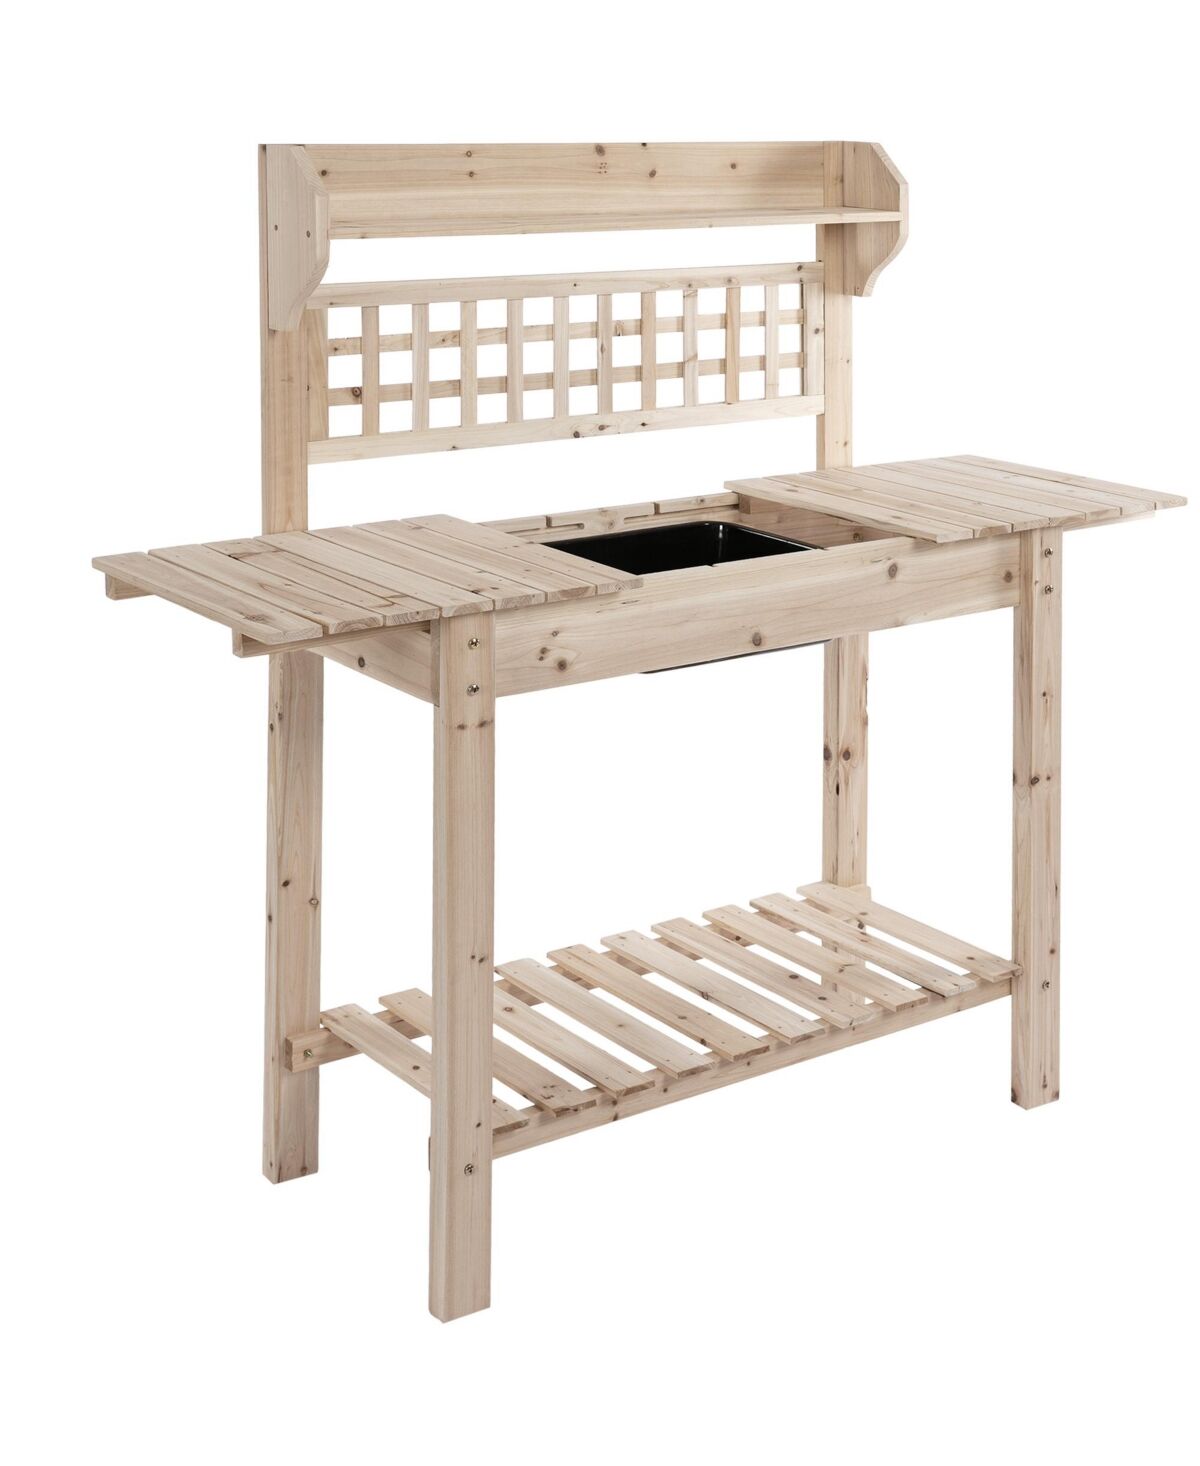 Outsunny Wooden Outdoor Potting Bench with Sink Basin & Clapboard, Natural - Natural